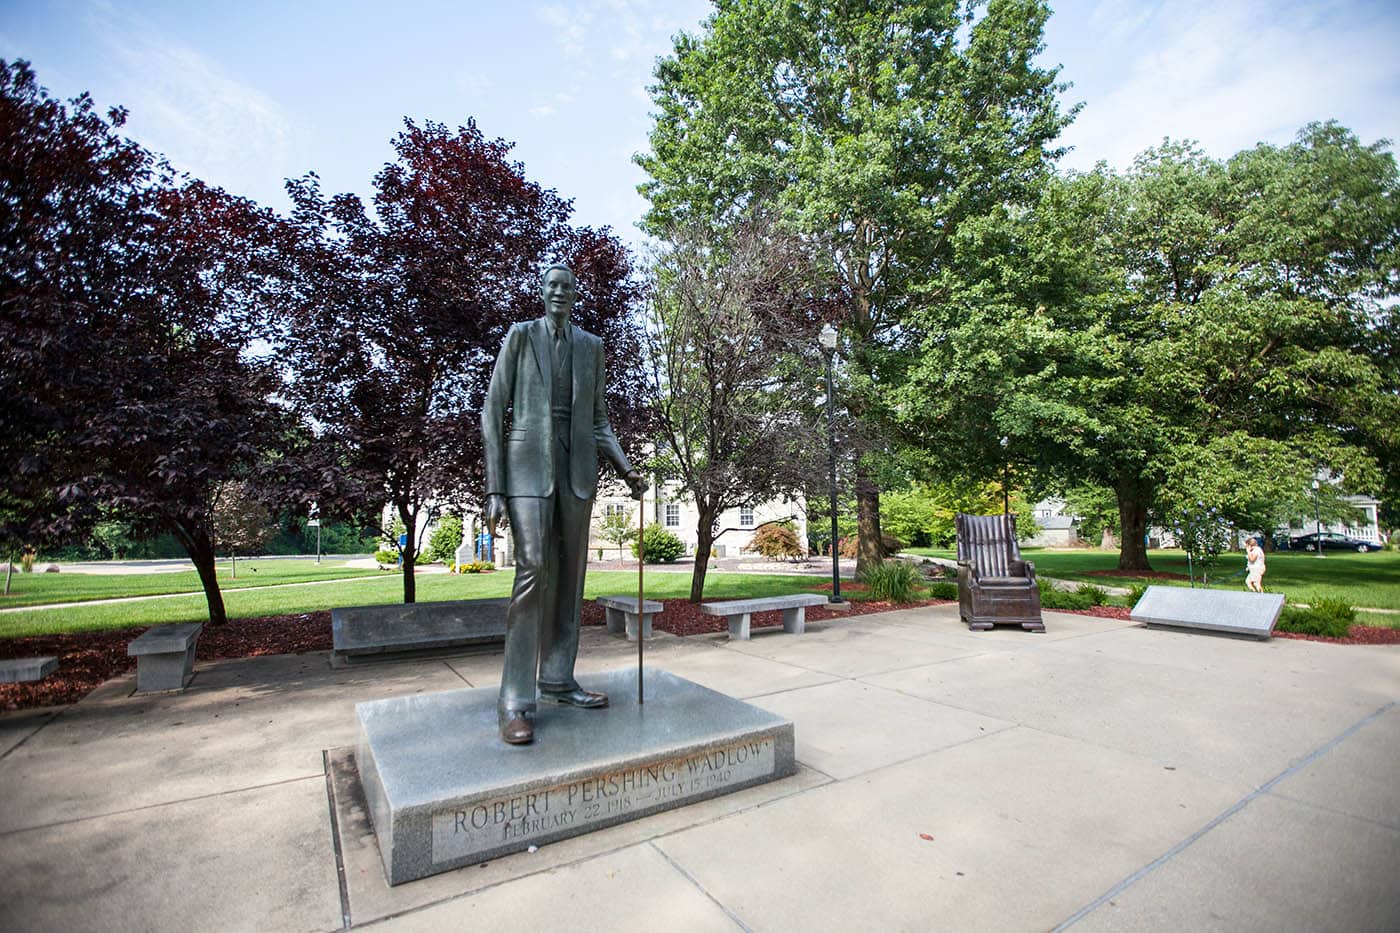 Best Illinois roadside attractions: Robert Wadlow Statue of the world's tallest man in Alton, Illinois. Visit this roadside attraction on an Illinois road trip with kids or weekend getaway with friends. Add the Robert Wadlow statue to your road trip bucket list and visit them on your next travel adventure.